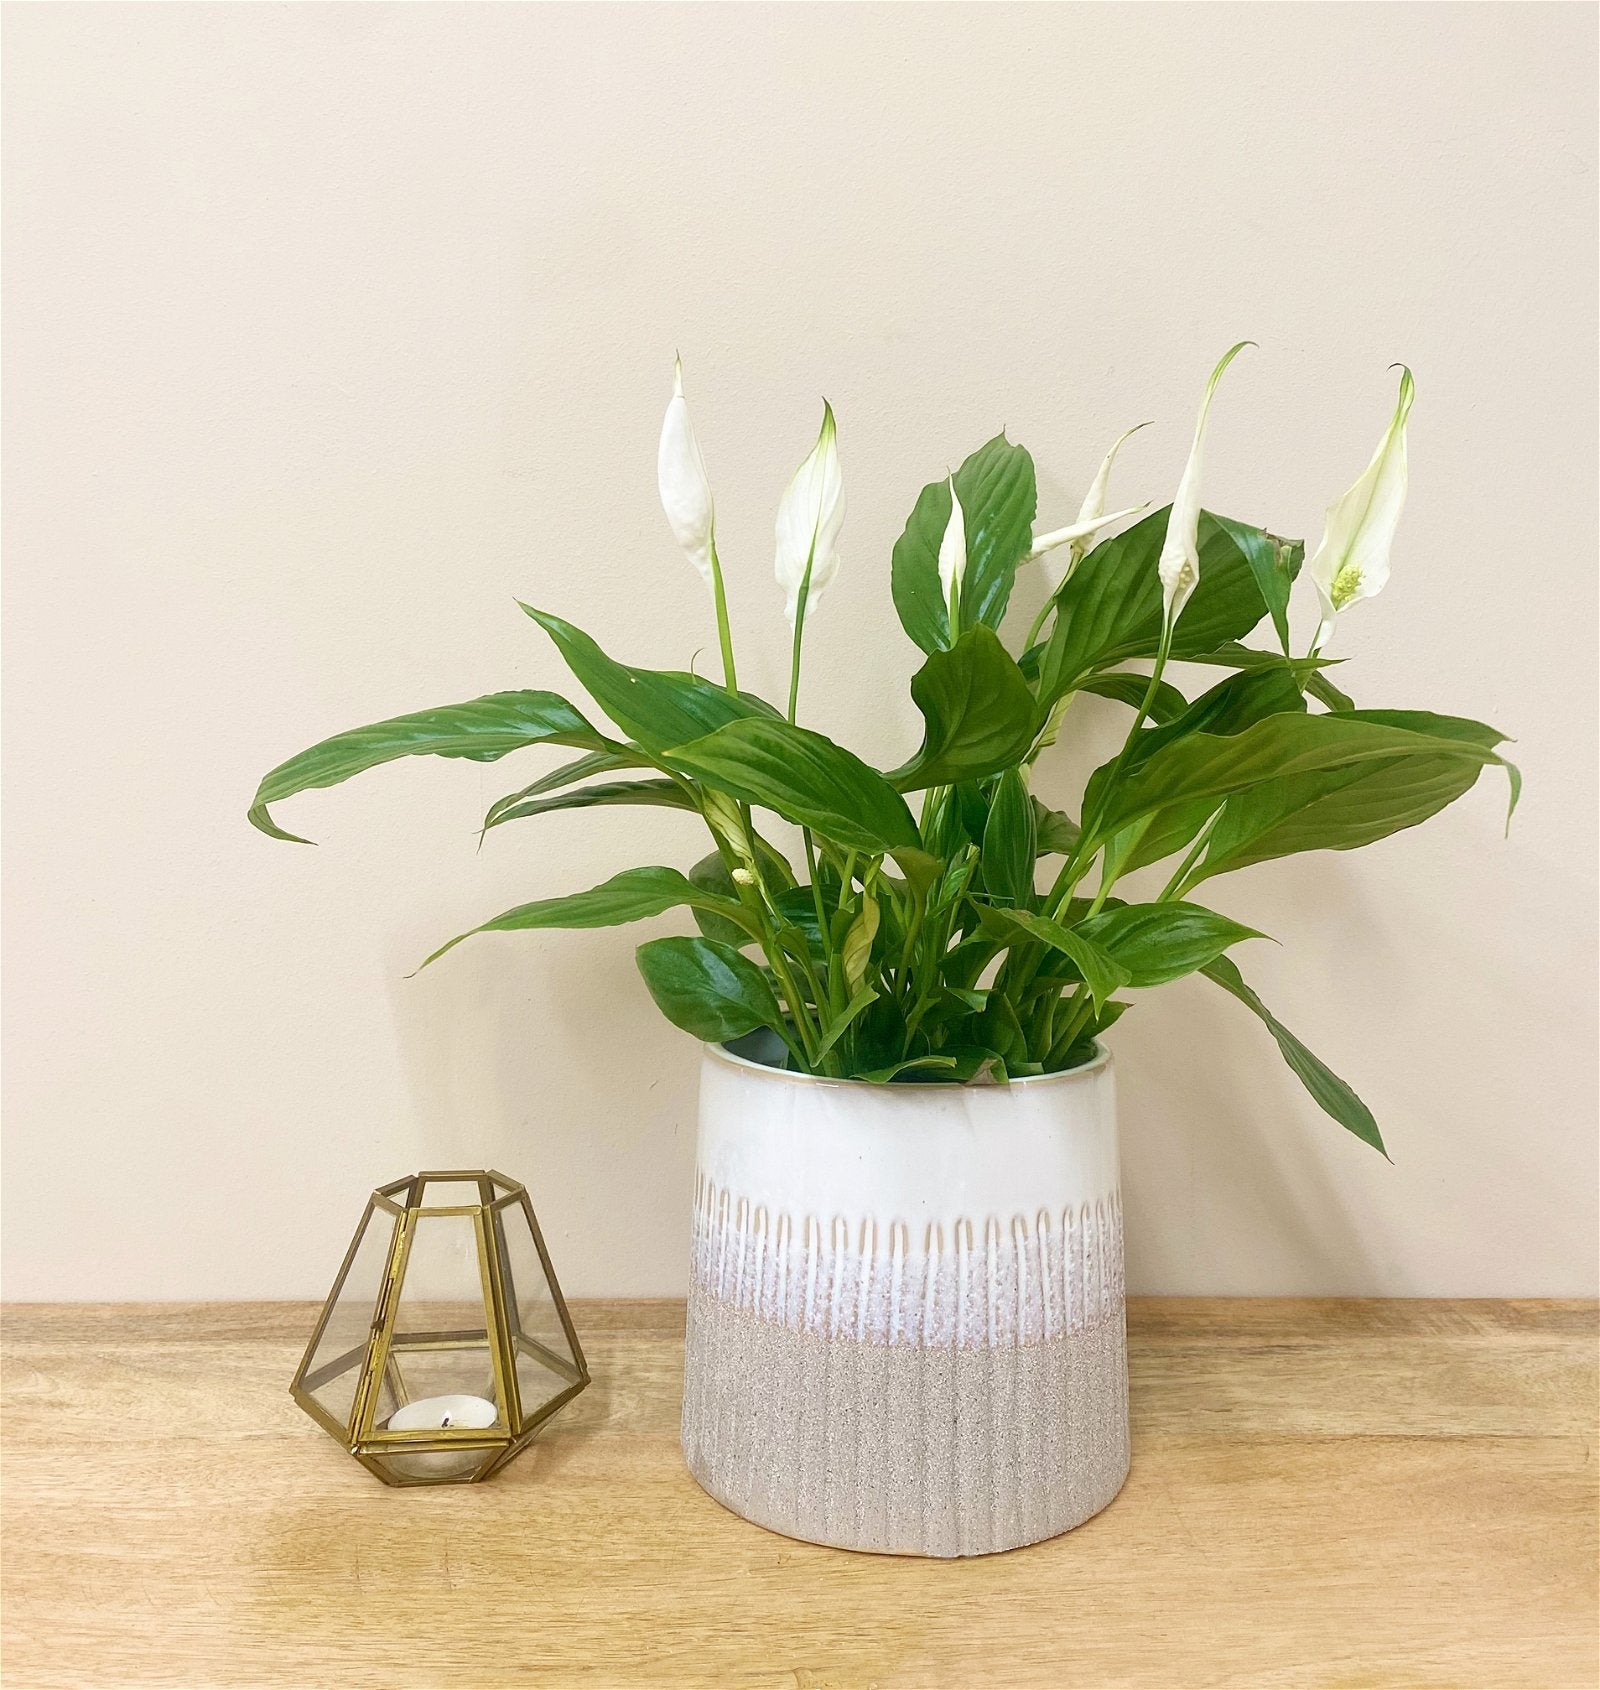 Grey Two-tone Textured Planter - a Cheeky Plant